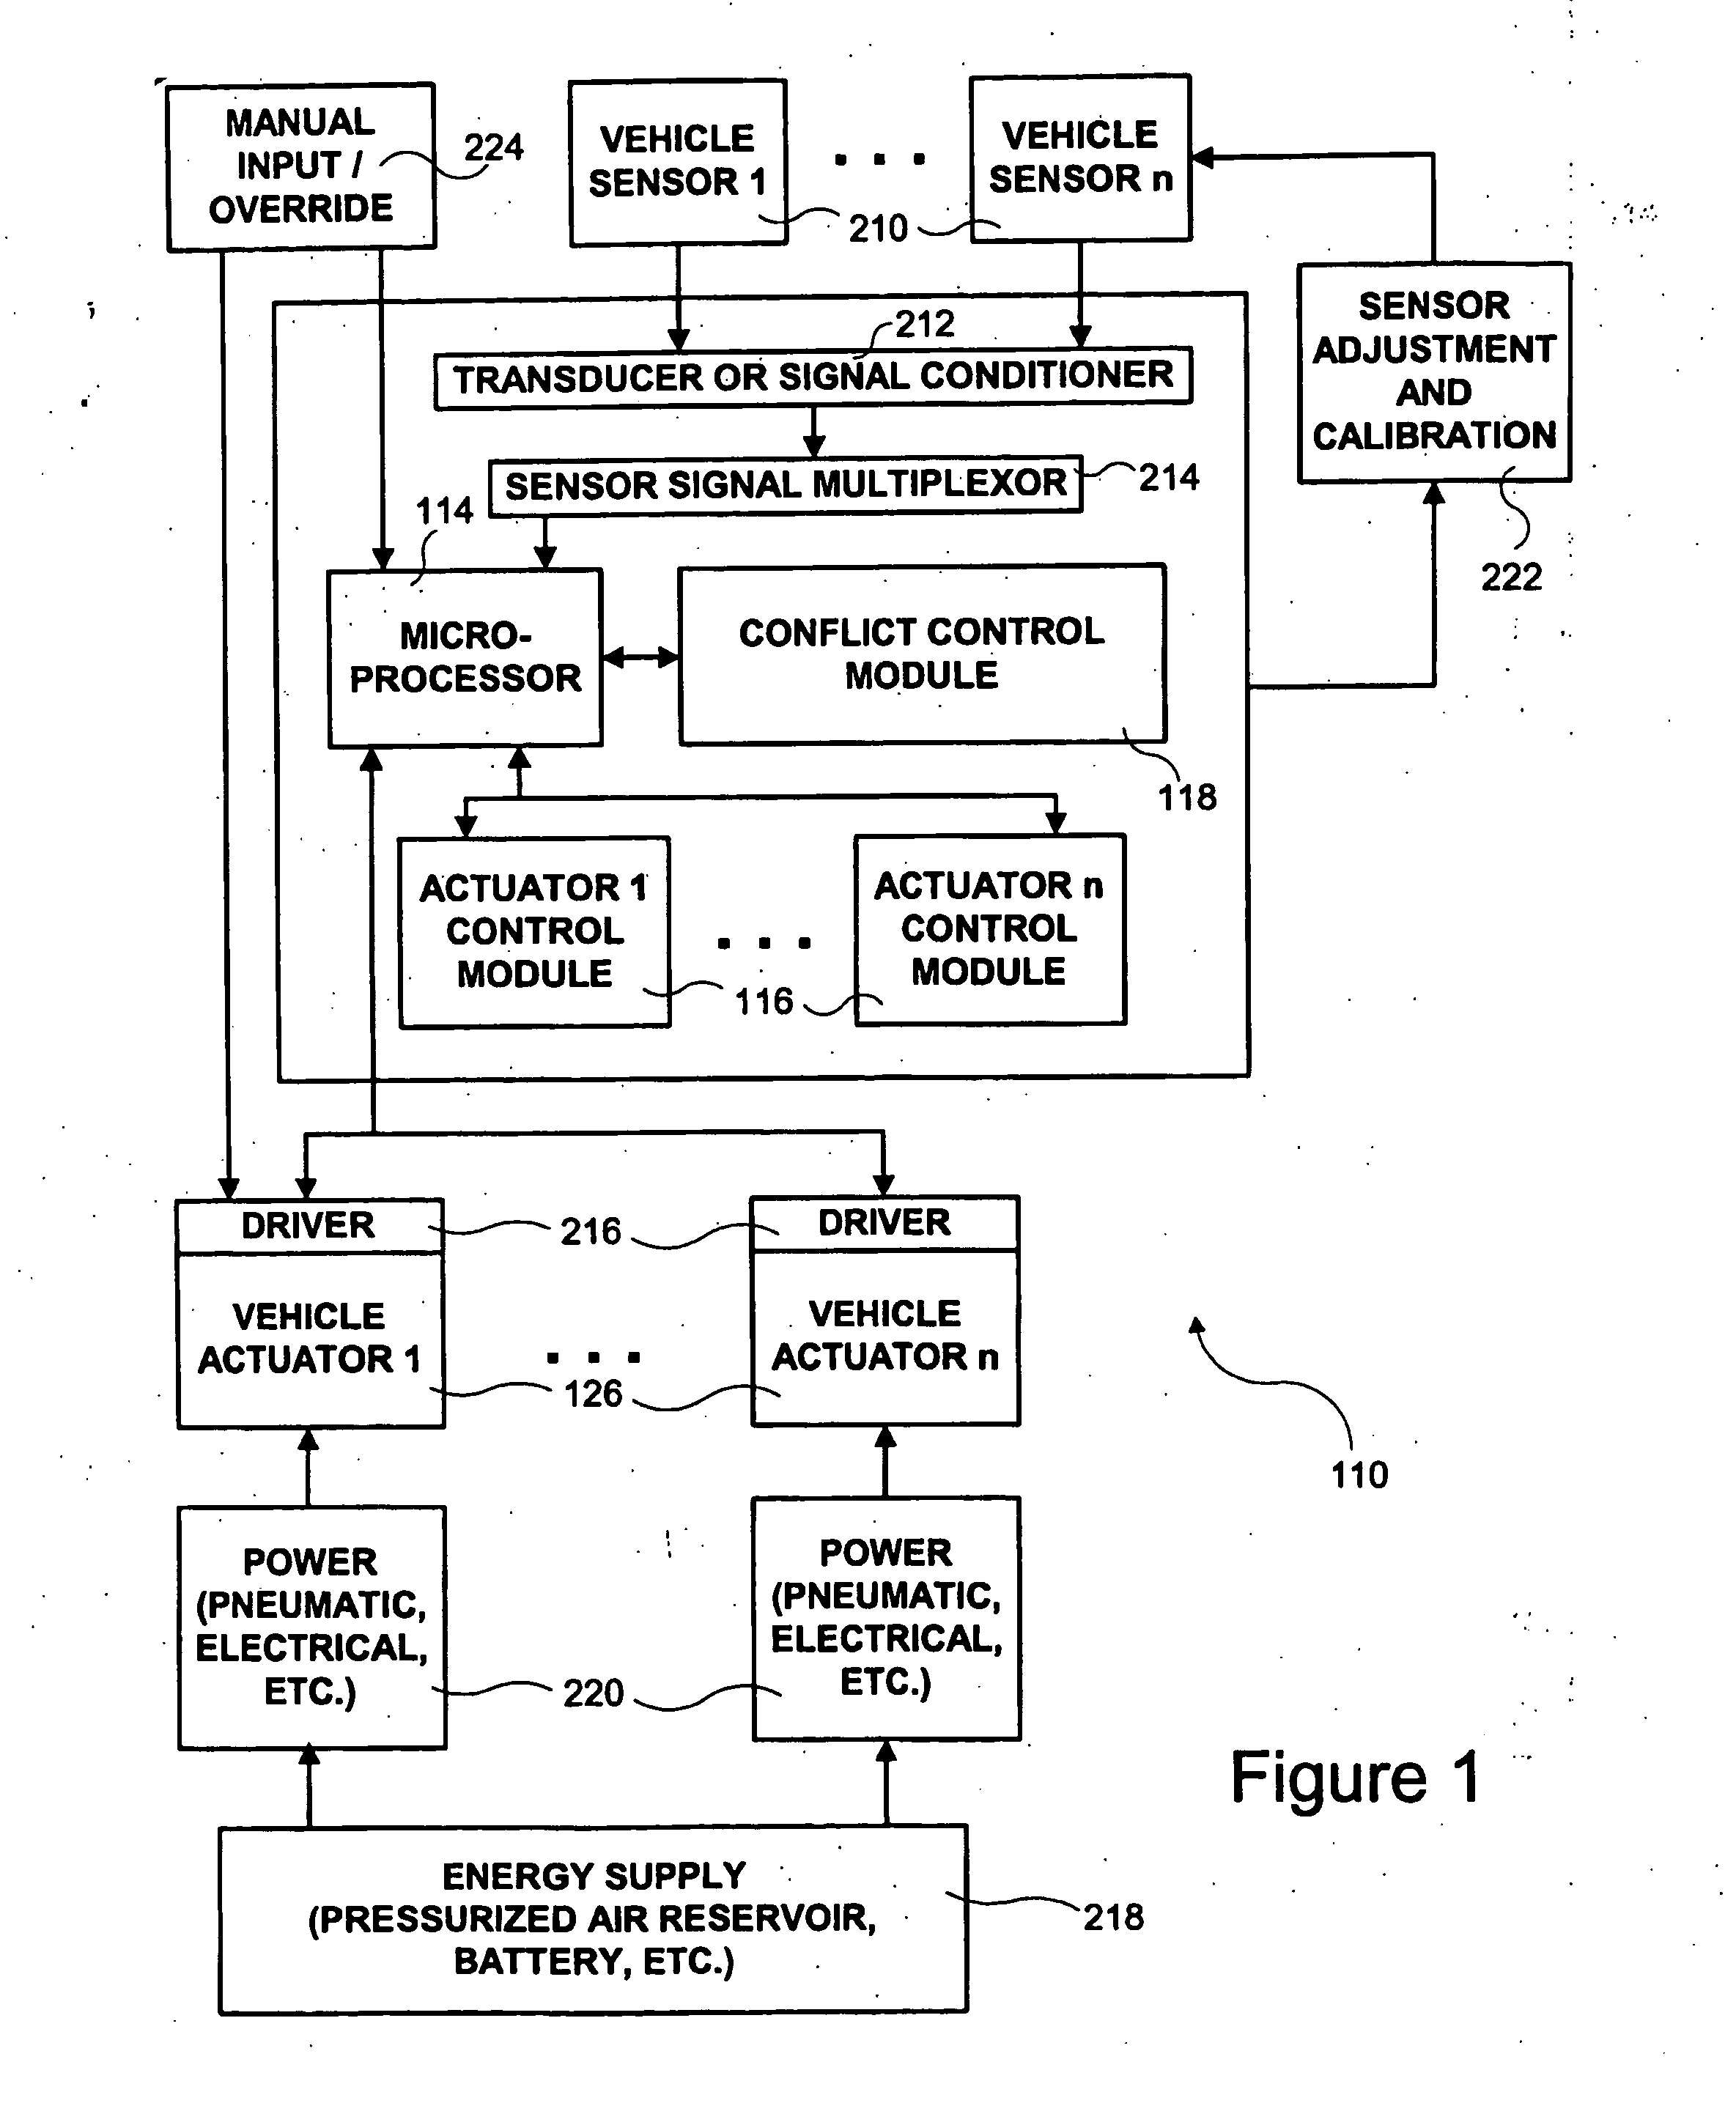 Central electronic control network for vehicle dynamics and ride control systems in heavy vehicles